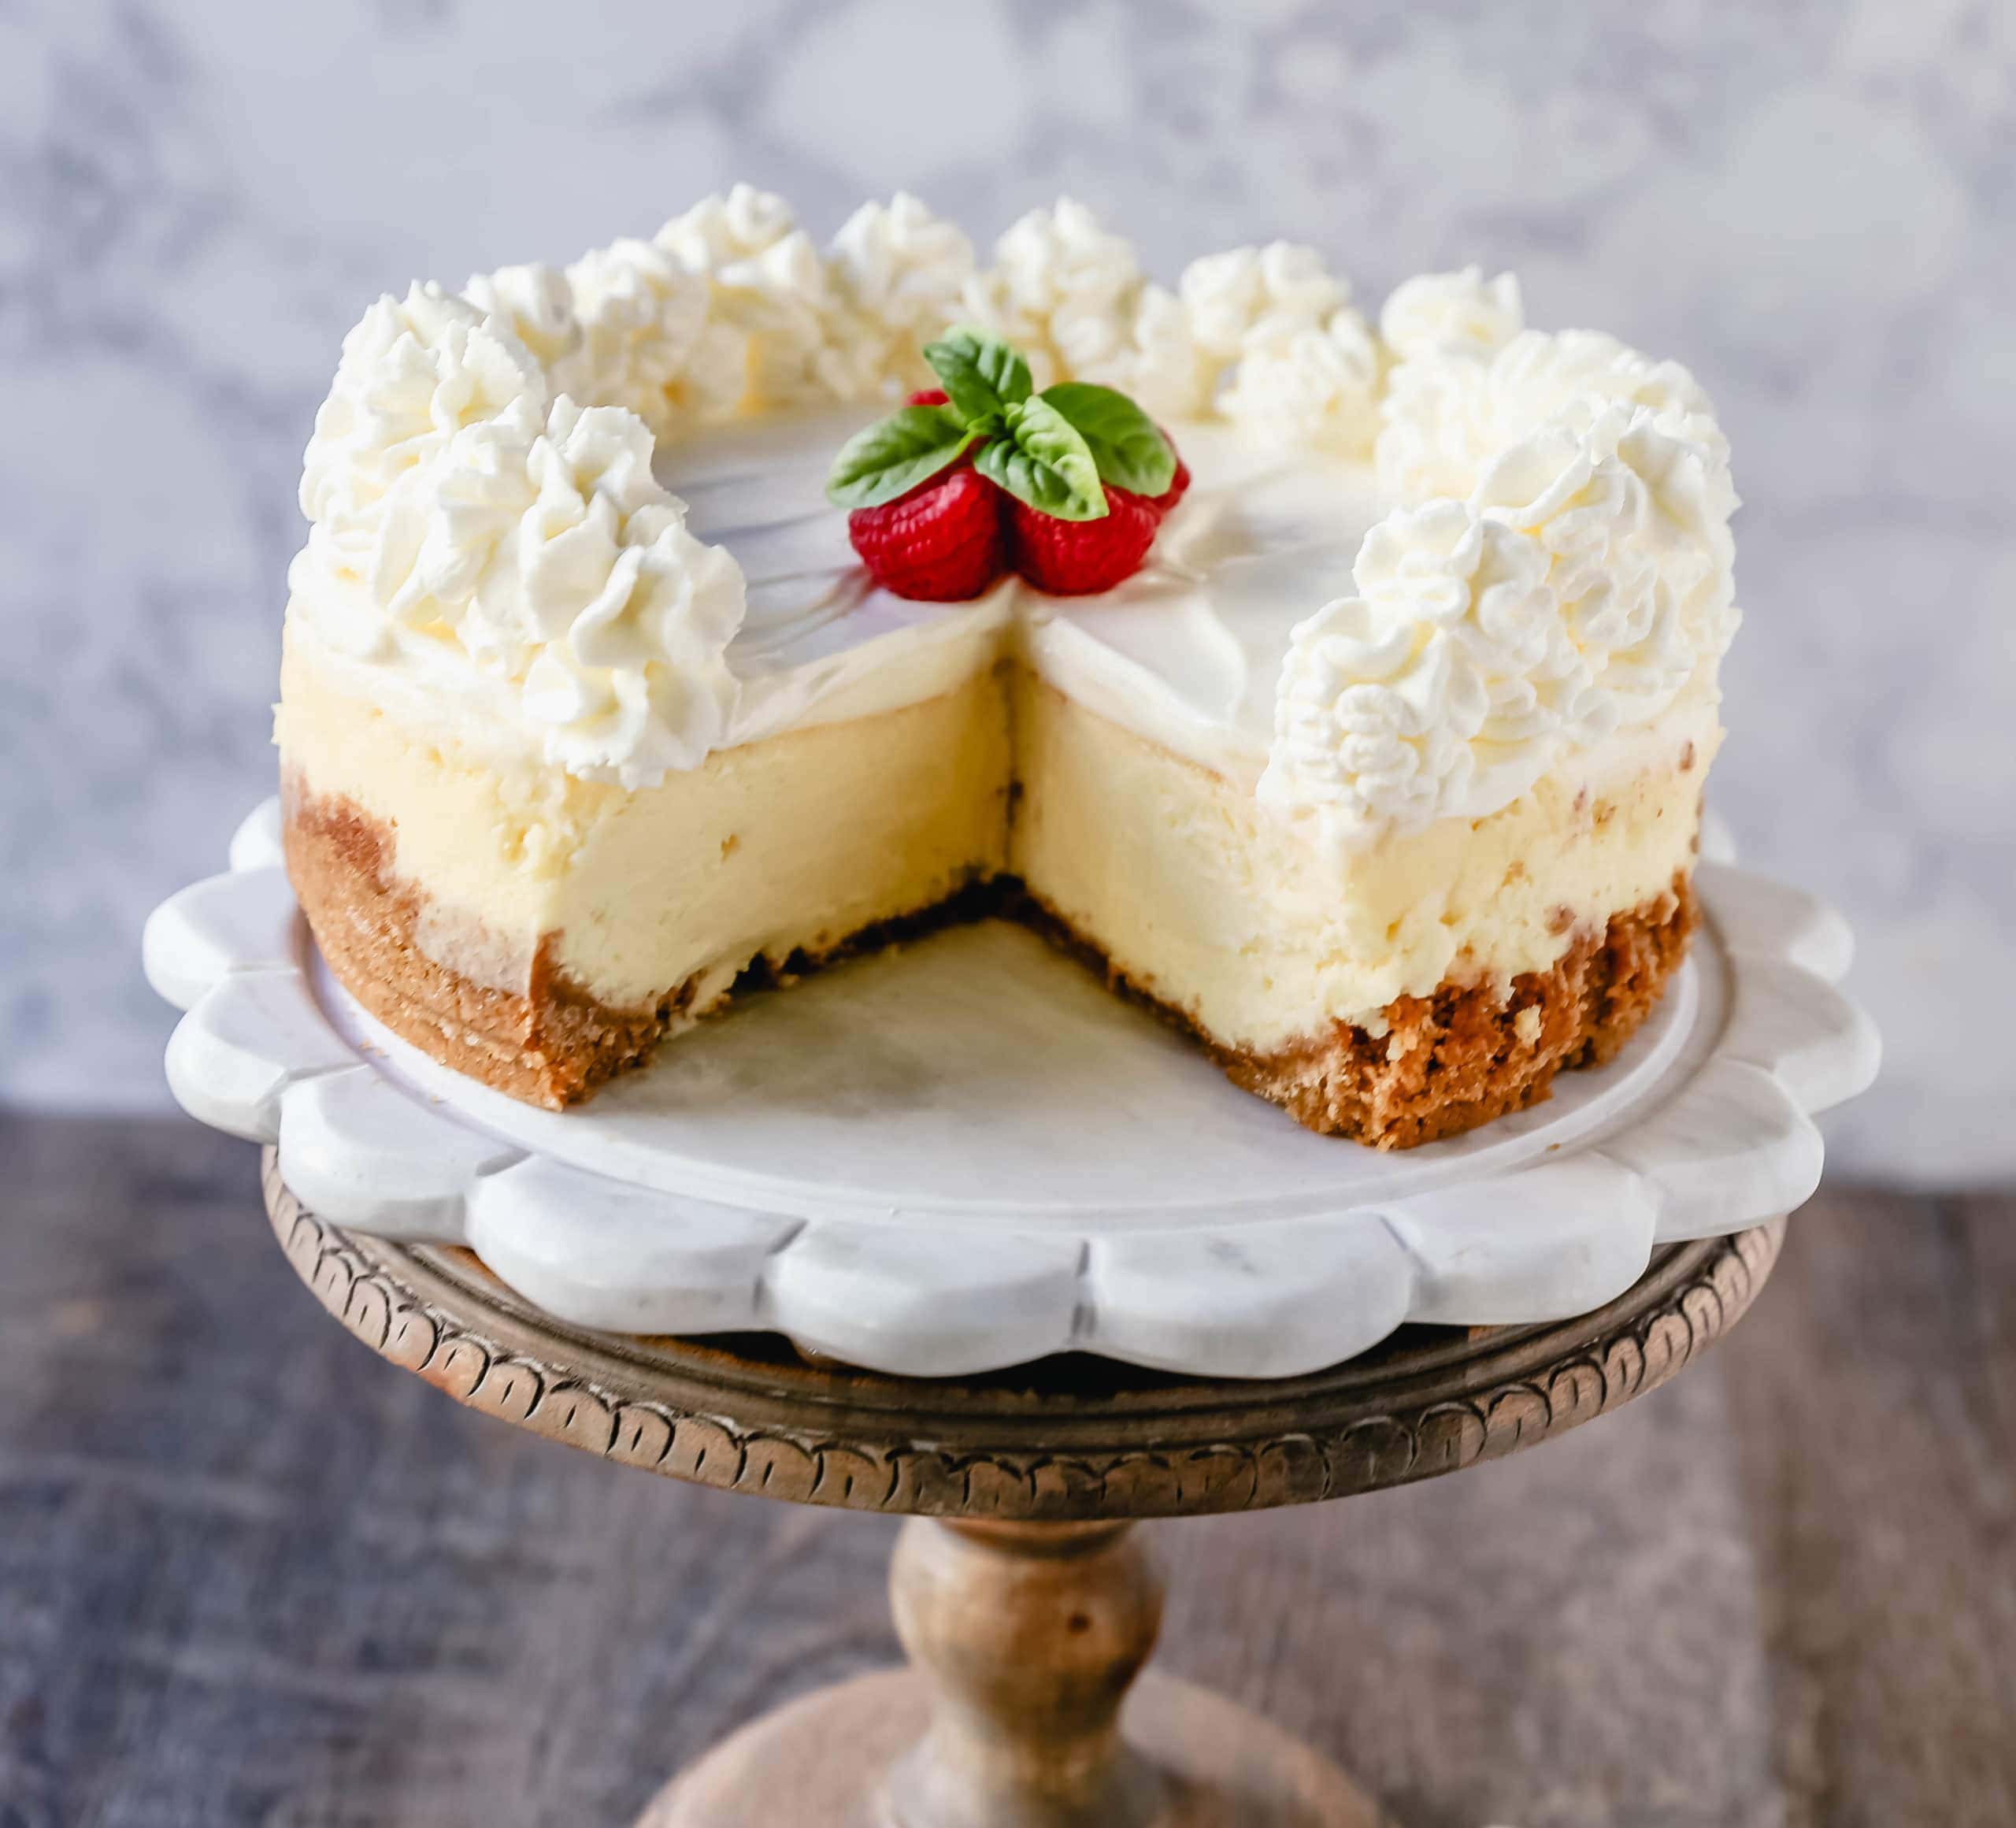 The Best Cheesecake Recipe How to make the creamiest, dreamiest, richest vanilla cheesecake with a buttery graham cracker crust. All of the tips and tricks for making the perfect cheesecake! www.modernhoney.com #cheesecake #vanillacheesecake #cheesecakerecipe #dessert